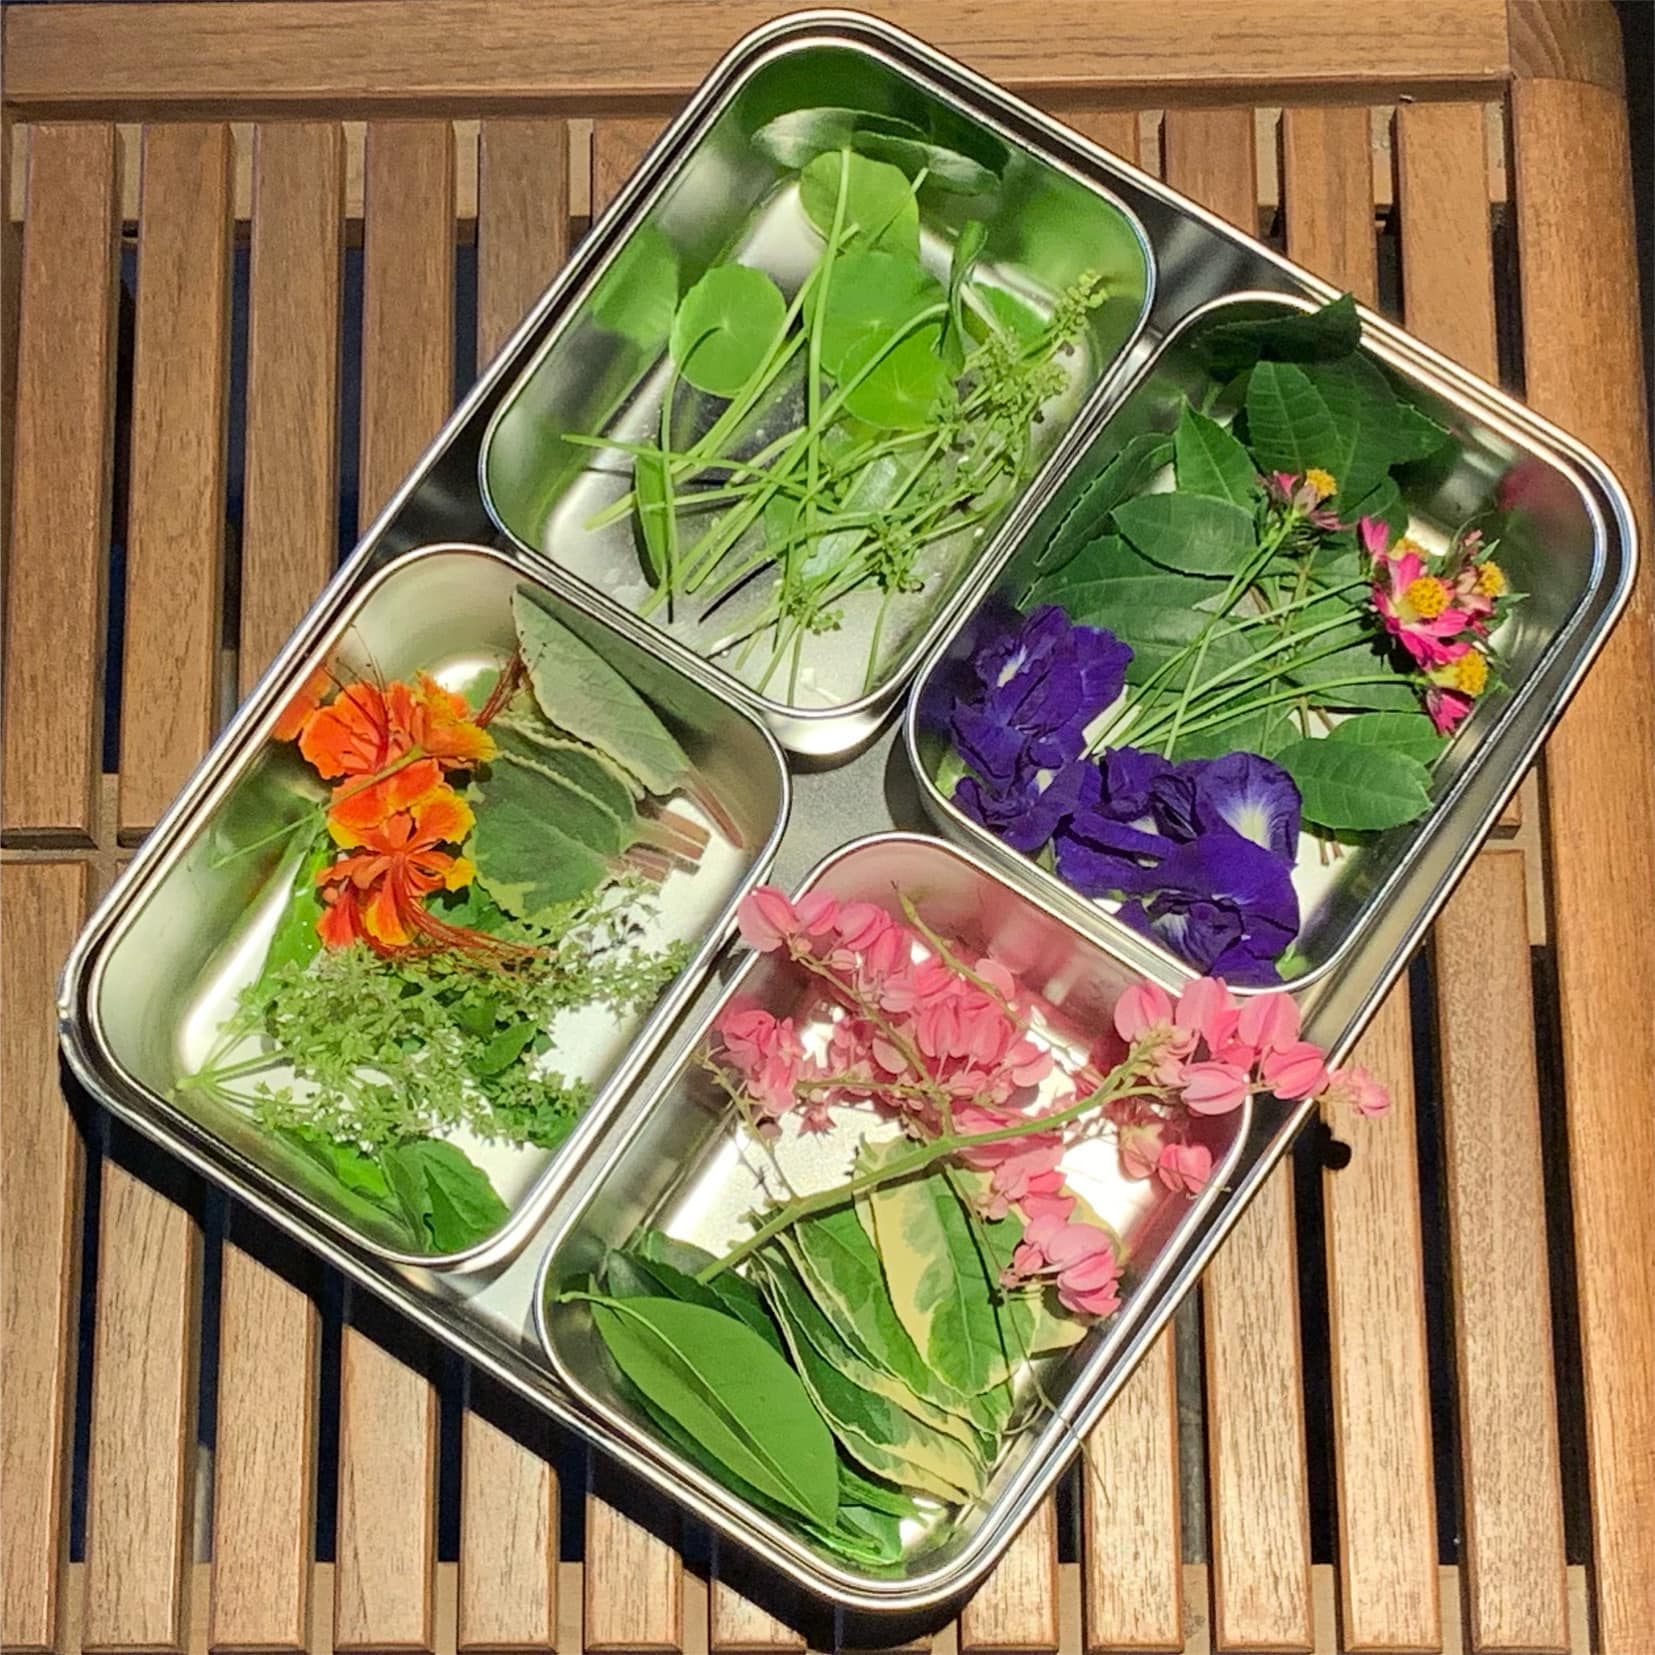 Water pennywort, butterfly pea, broadleaf thyme, coral vine are among plants picked from Bo.lan’s garden for Wasteland’s cocktail concoctions. Photo: Wasteland / Courtesy